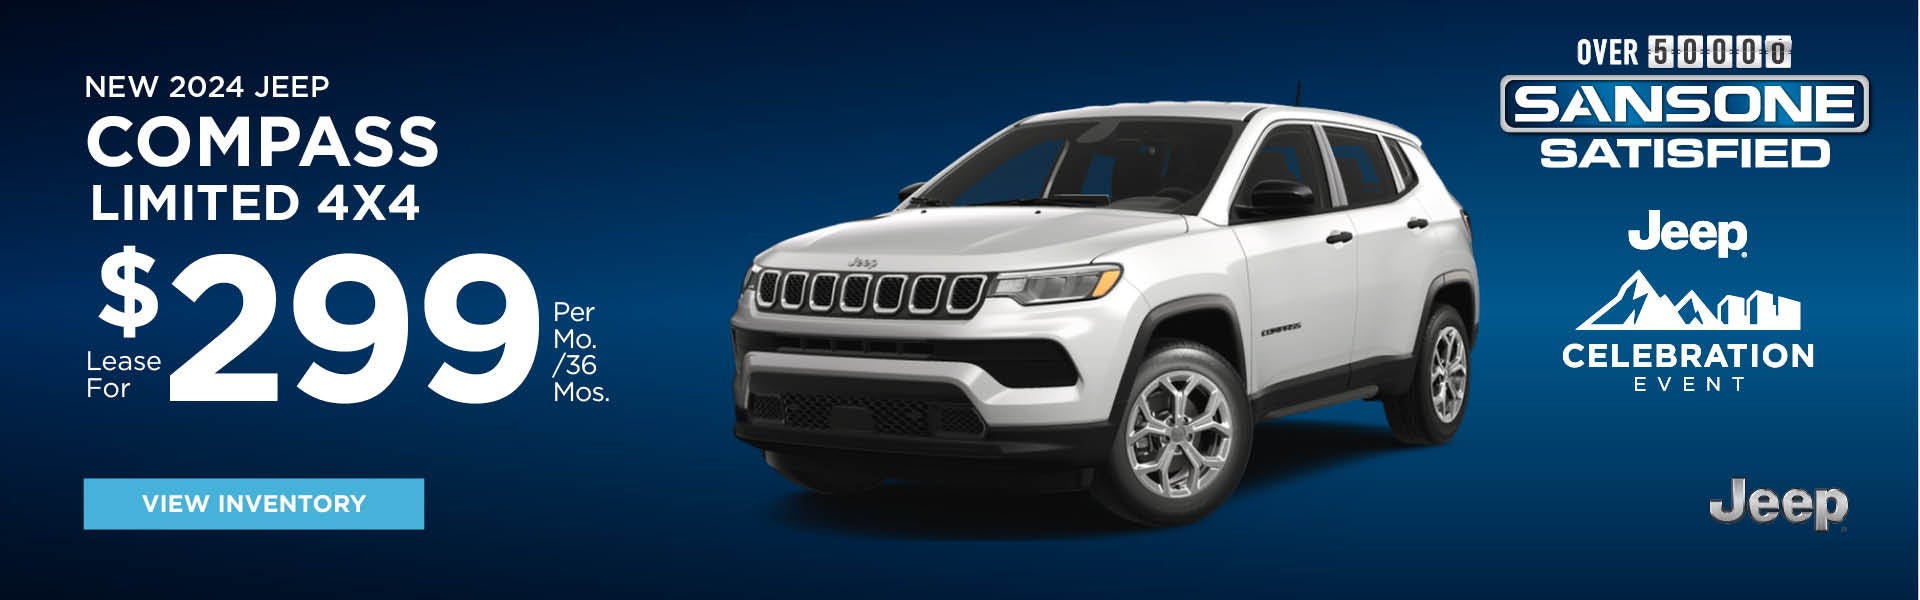 New 2024 Jeep Compass Limited 4x4 - $299/36 months